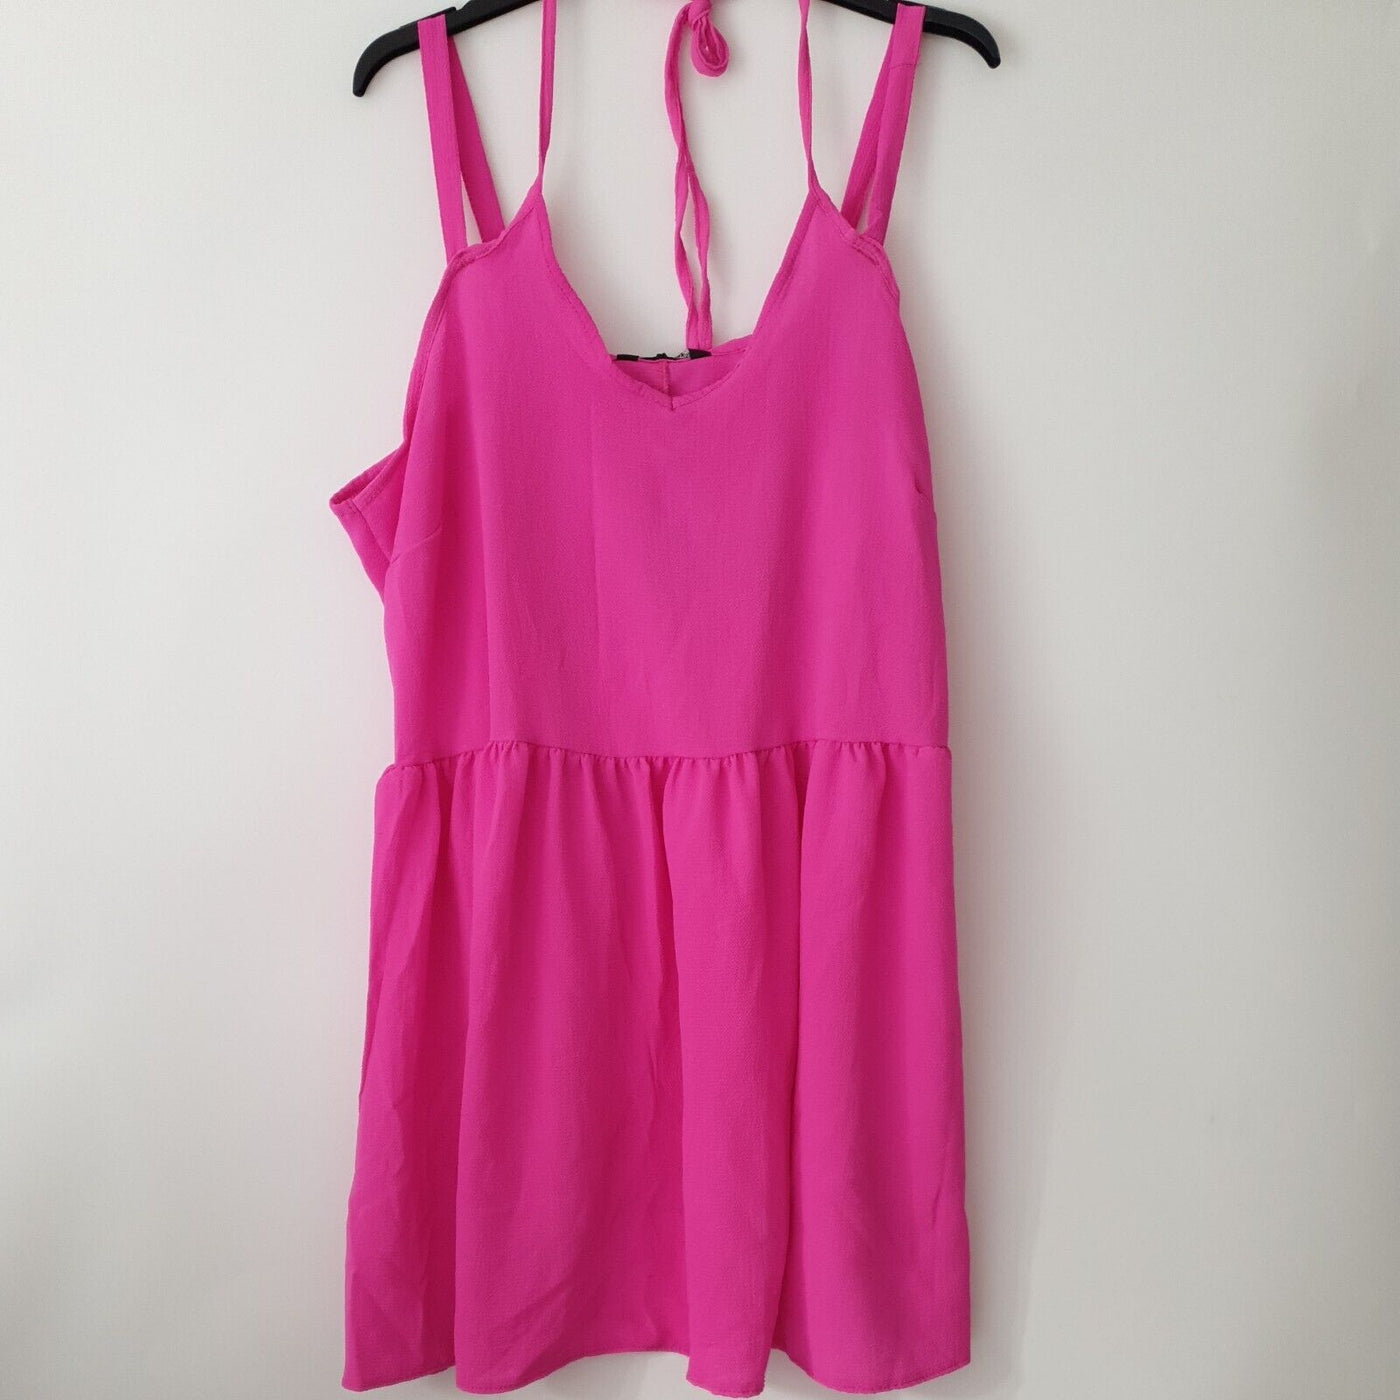 Limited Collection Pink Cami Top Size 22****Ref V26